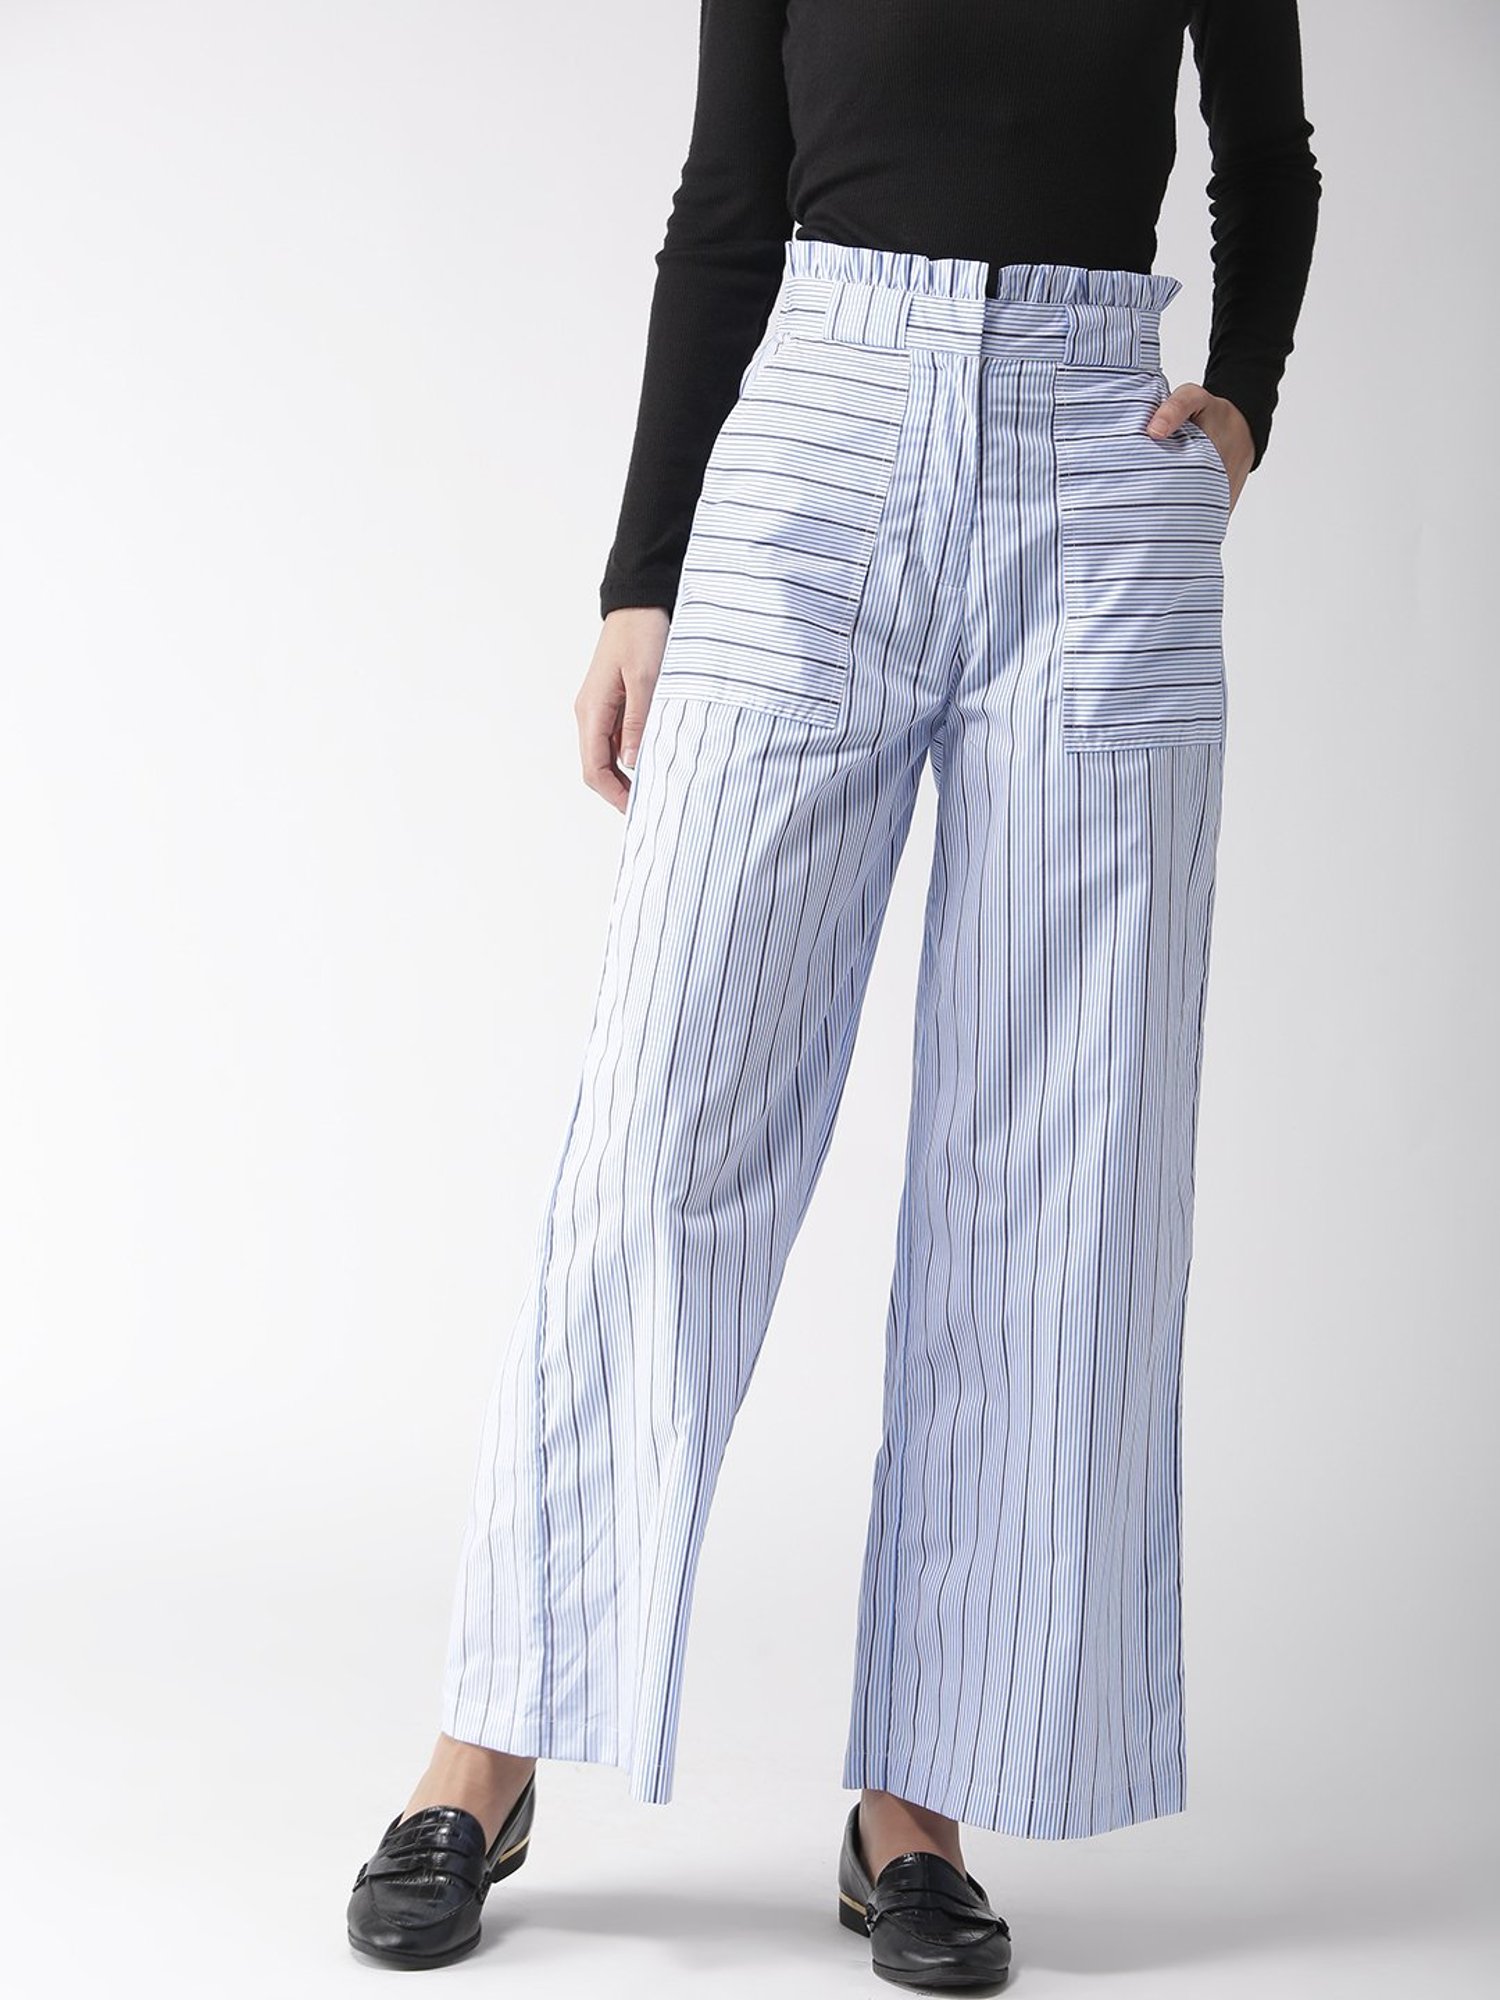 Buy Style Quotient Women Navy Blue  White Slim Fit Striped Regular Trousers 32NavyWhite at Amazonin